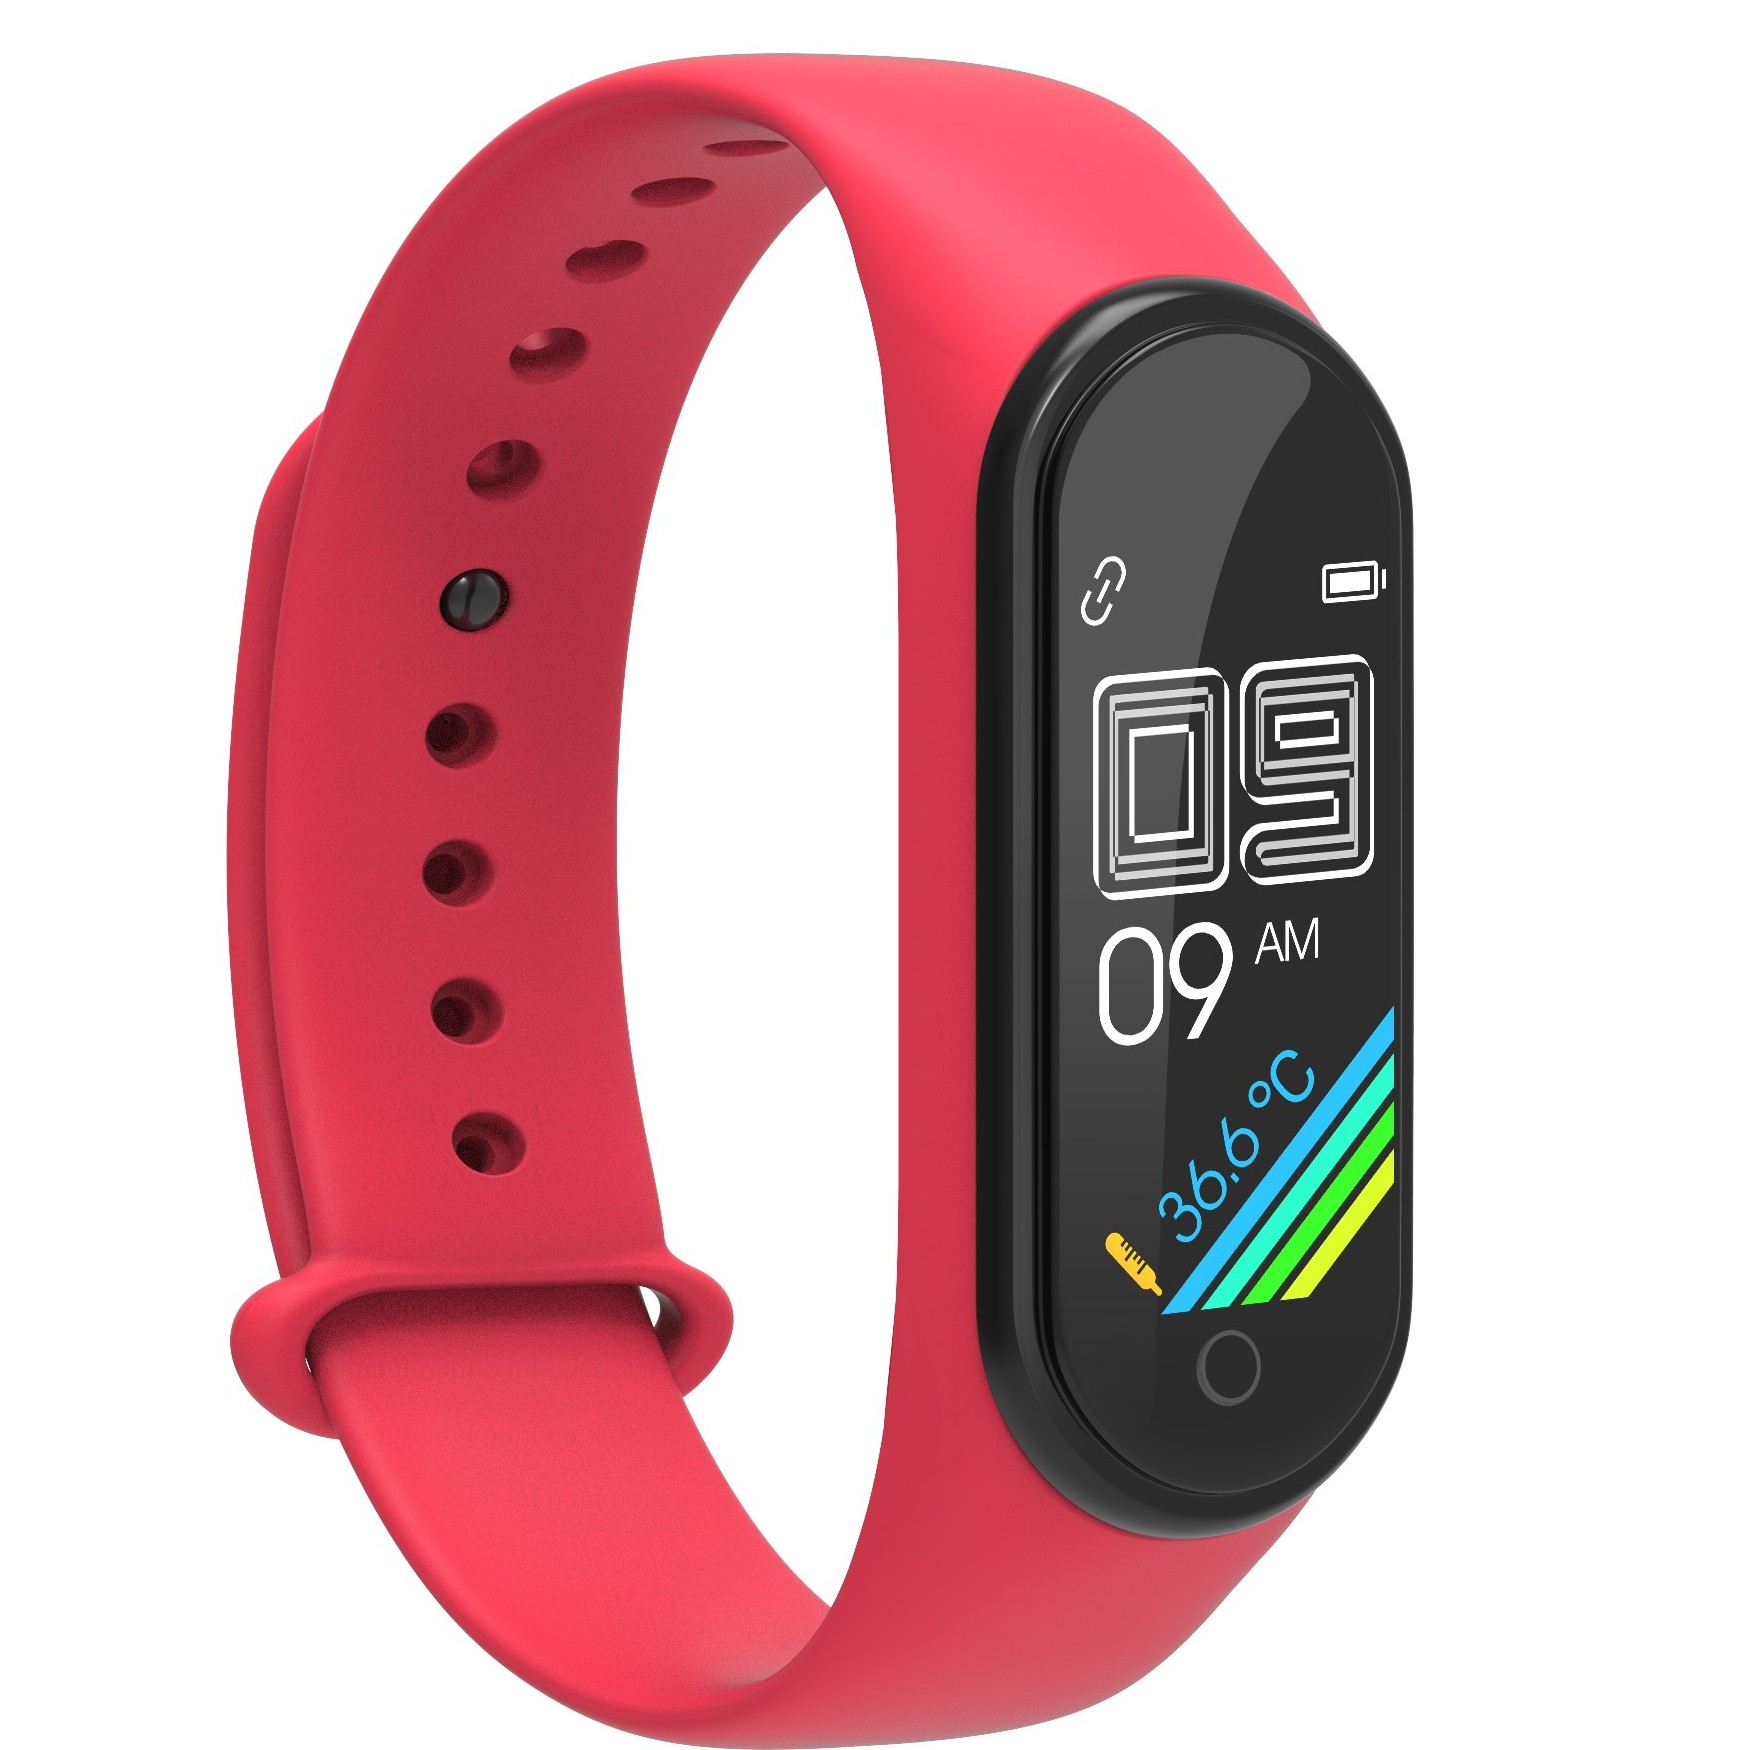 New IP67 Waterproof Body Temperature Smart Health Wristband with SPo2 